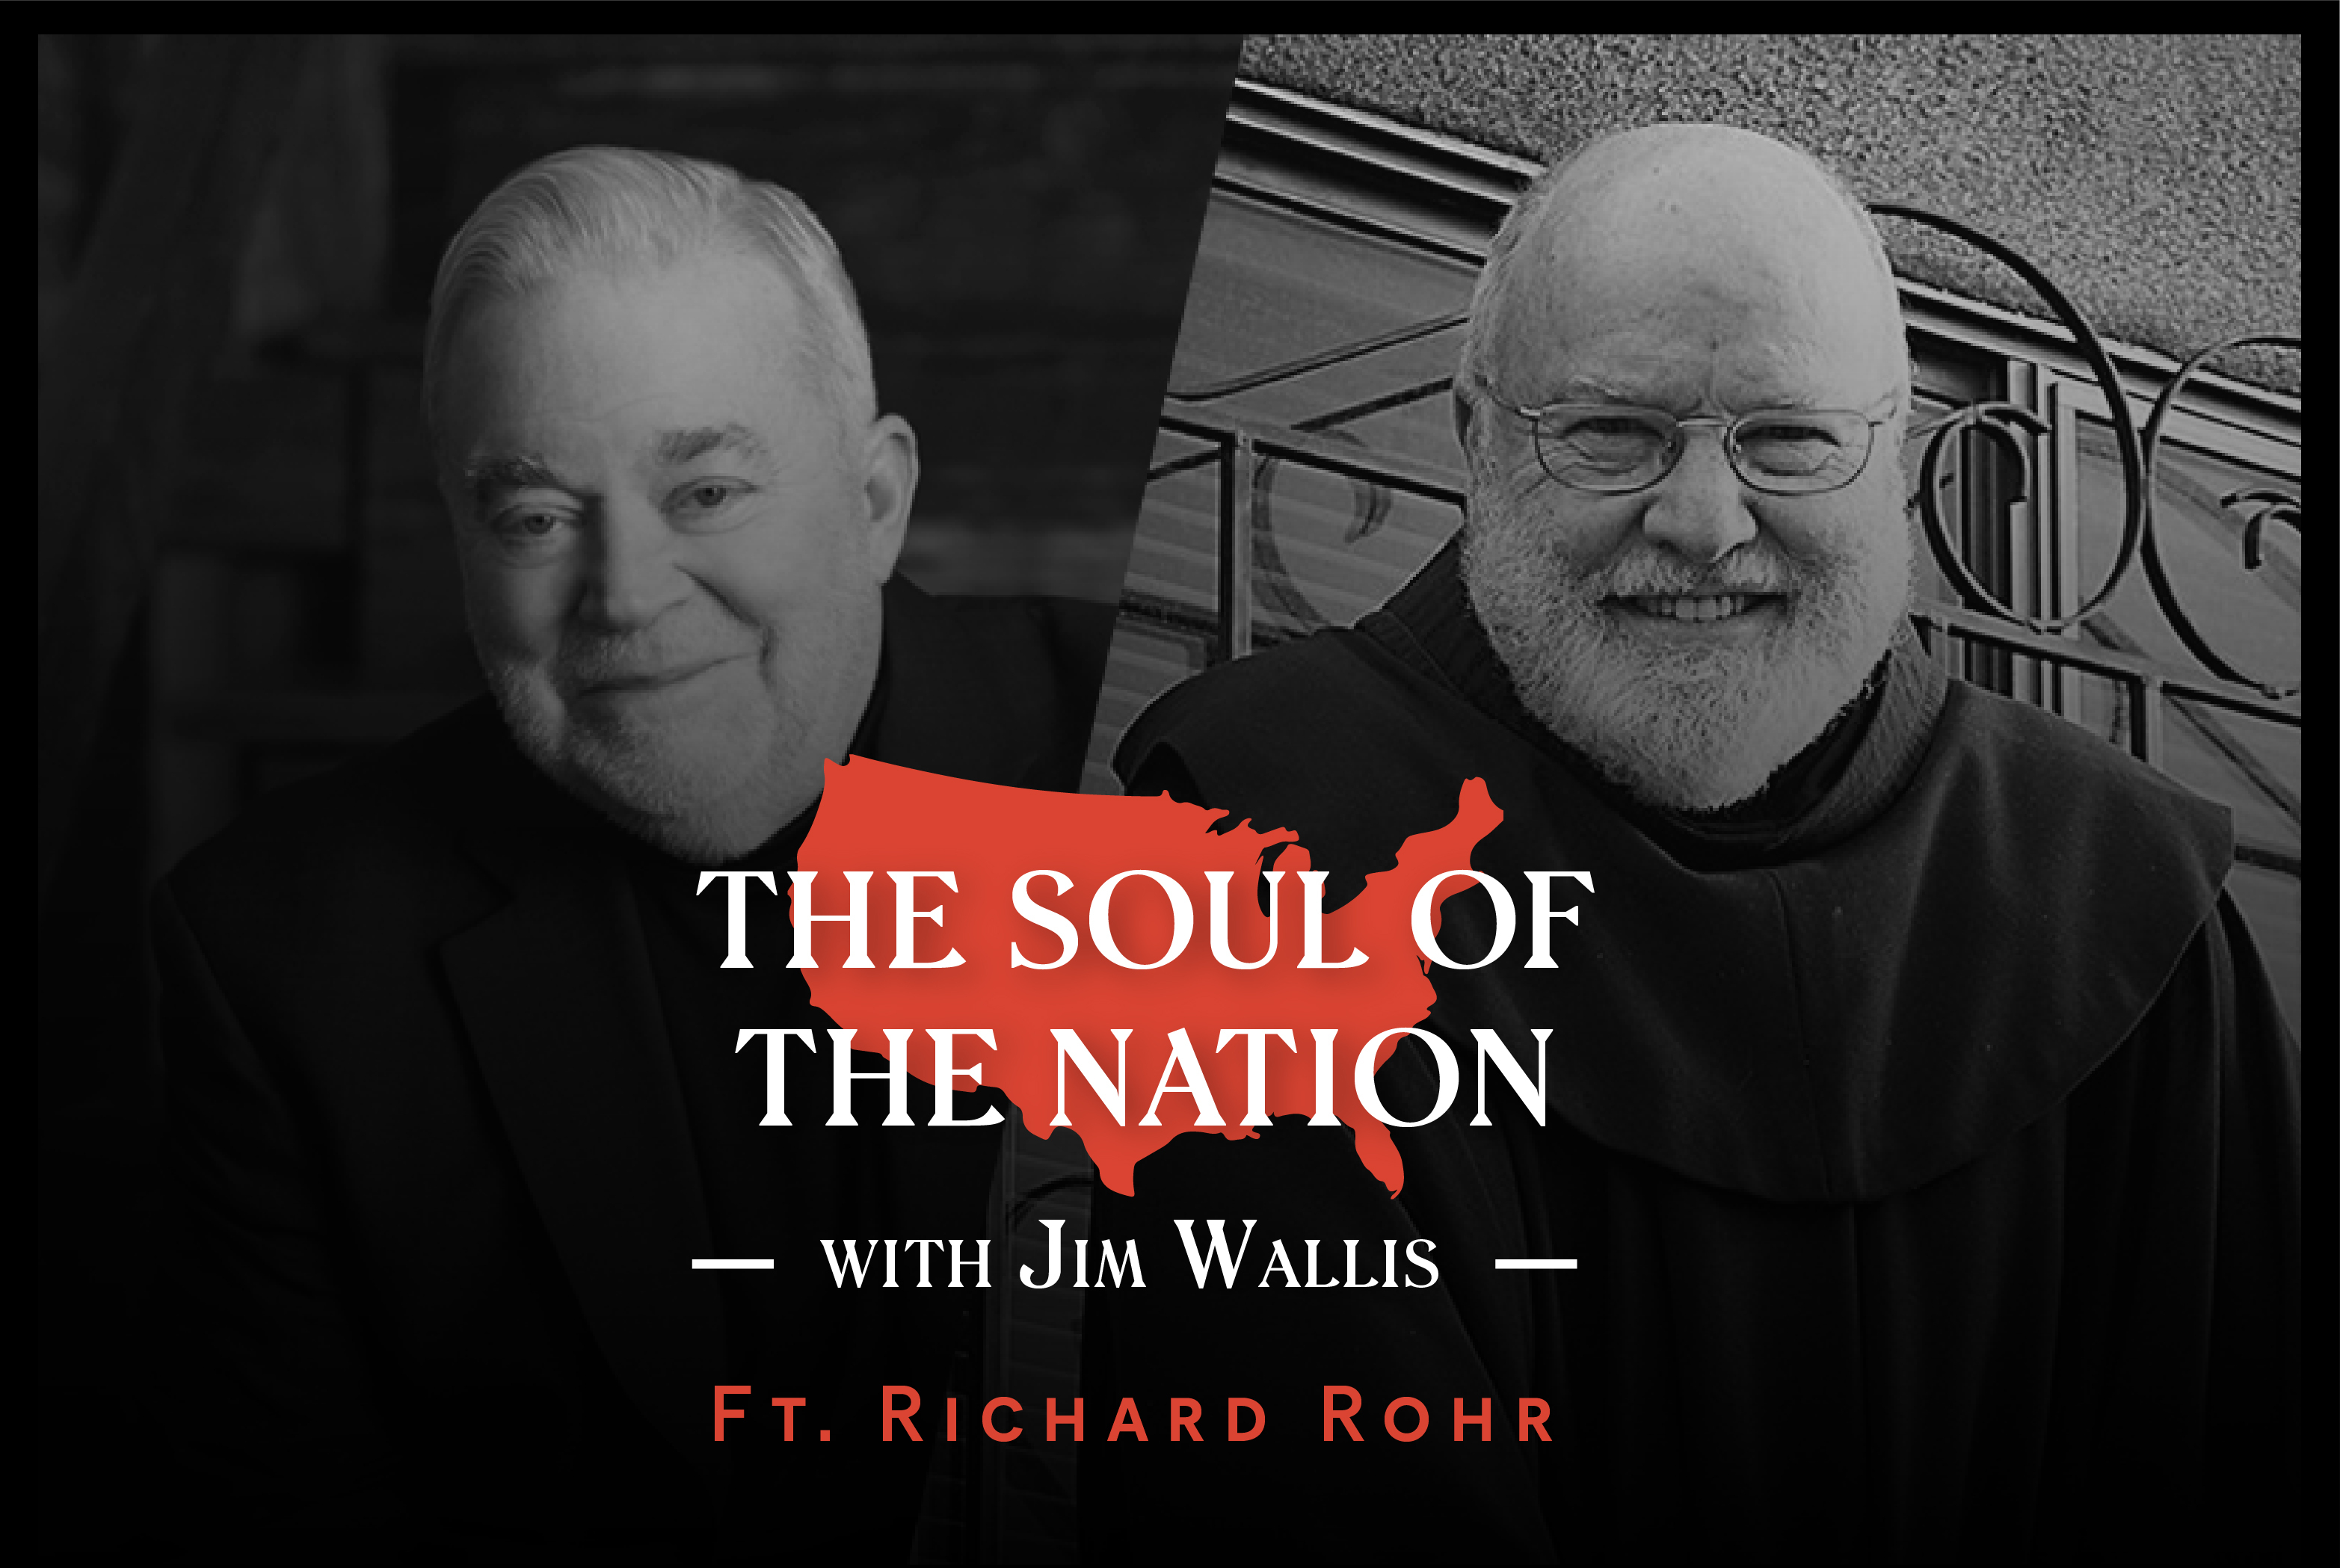 Sunday Sermon in a Pandemic Fr. Richard Rohr and Jim Wallis in